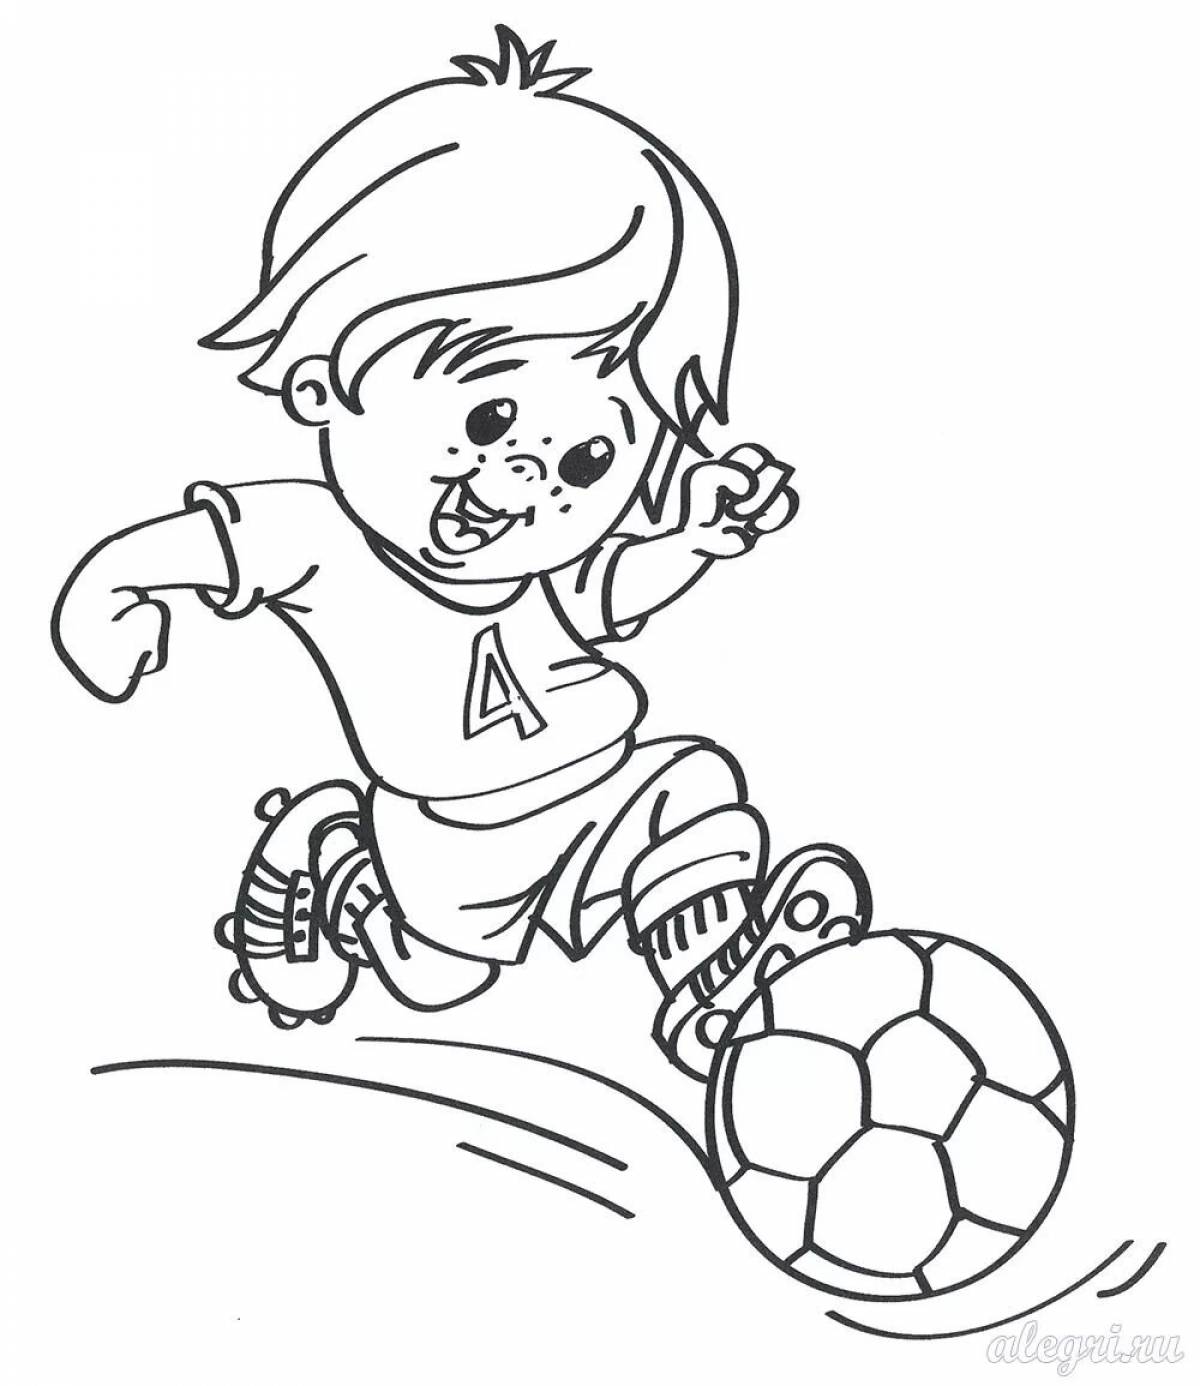 Color-frenzy sports coloring page for children 3-4 years old